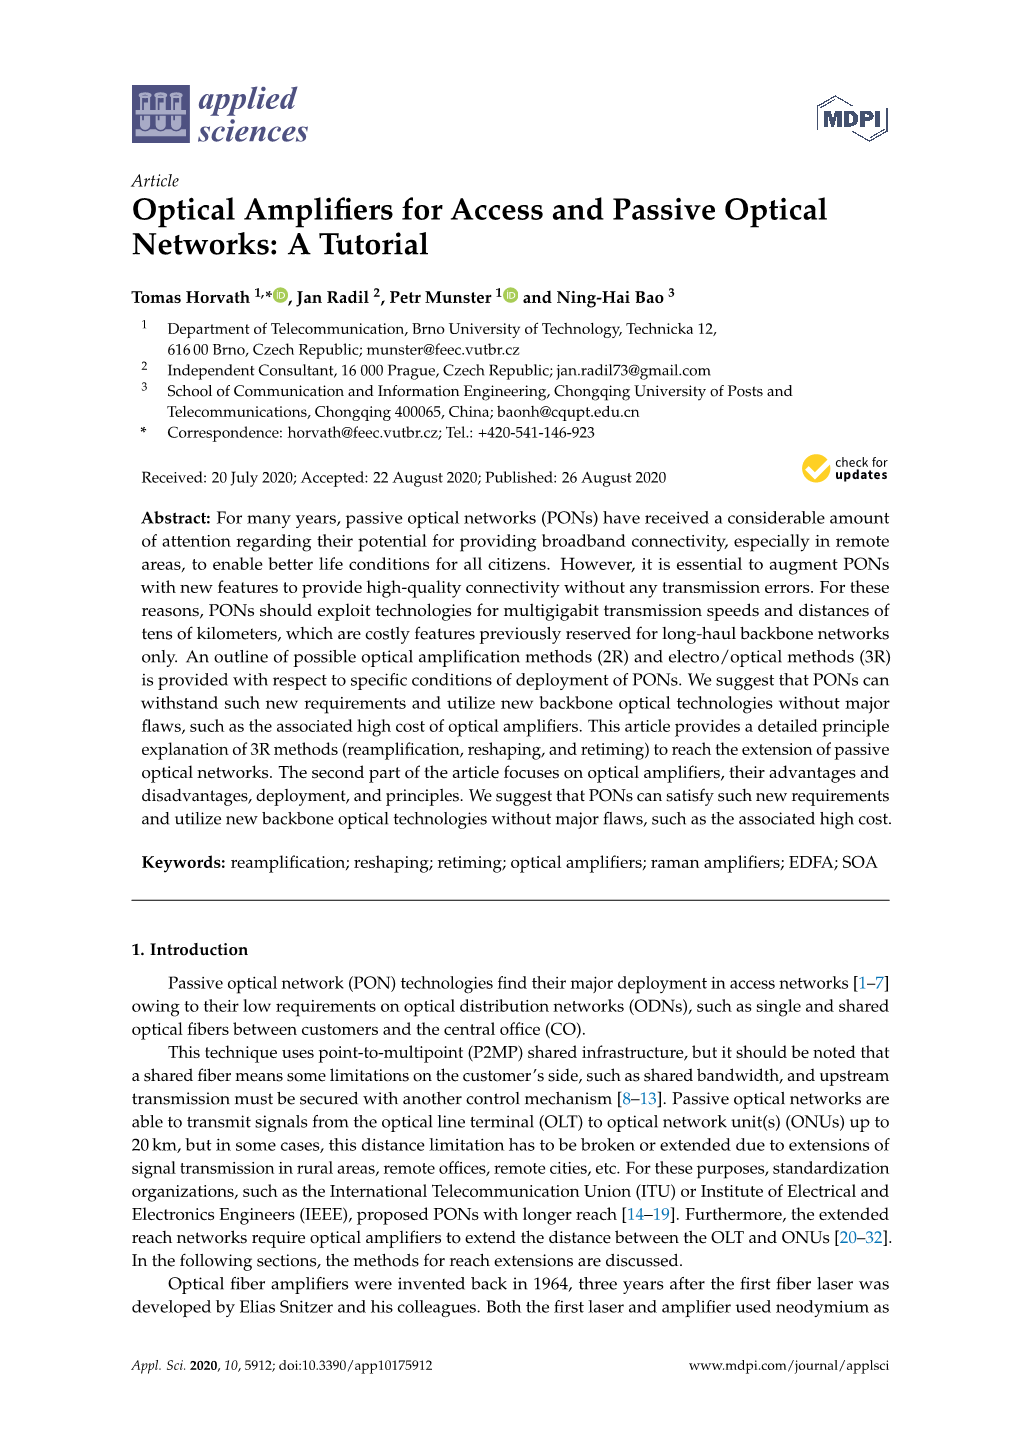 Optical Amplifiers for Access and Passive Optical Networks